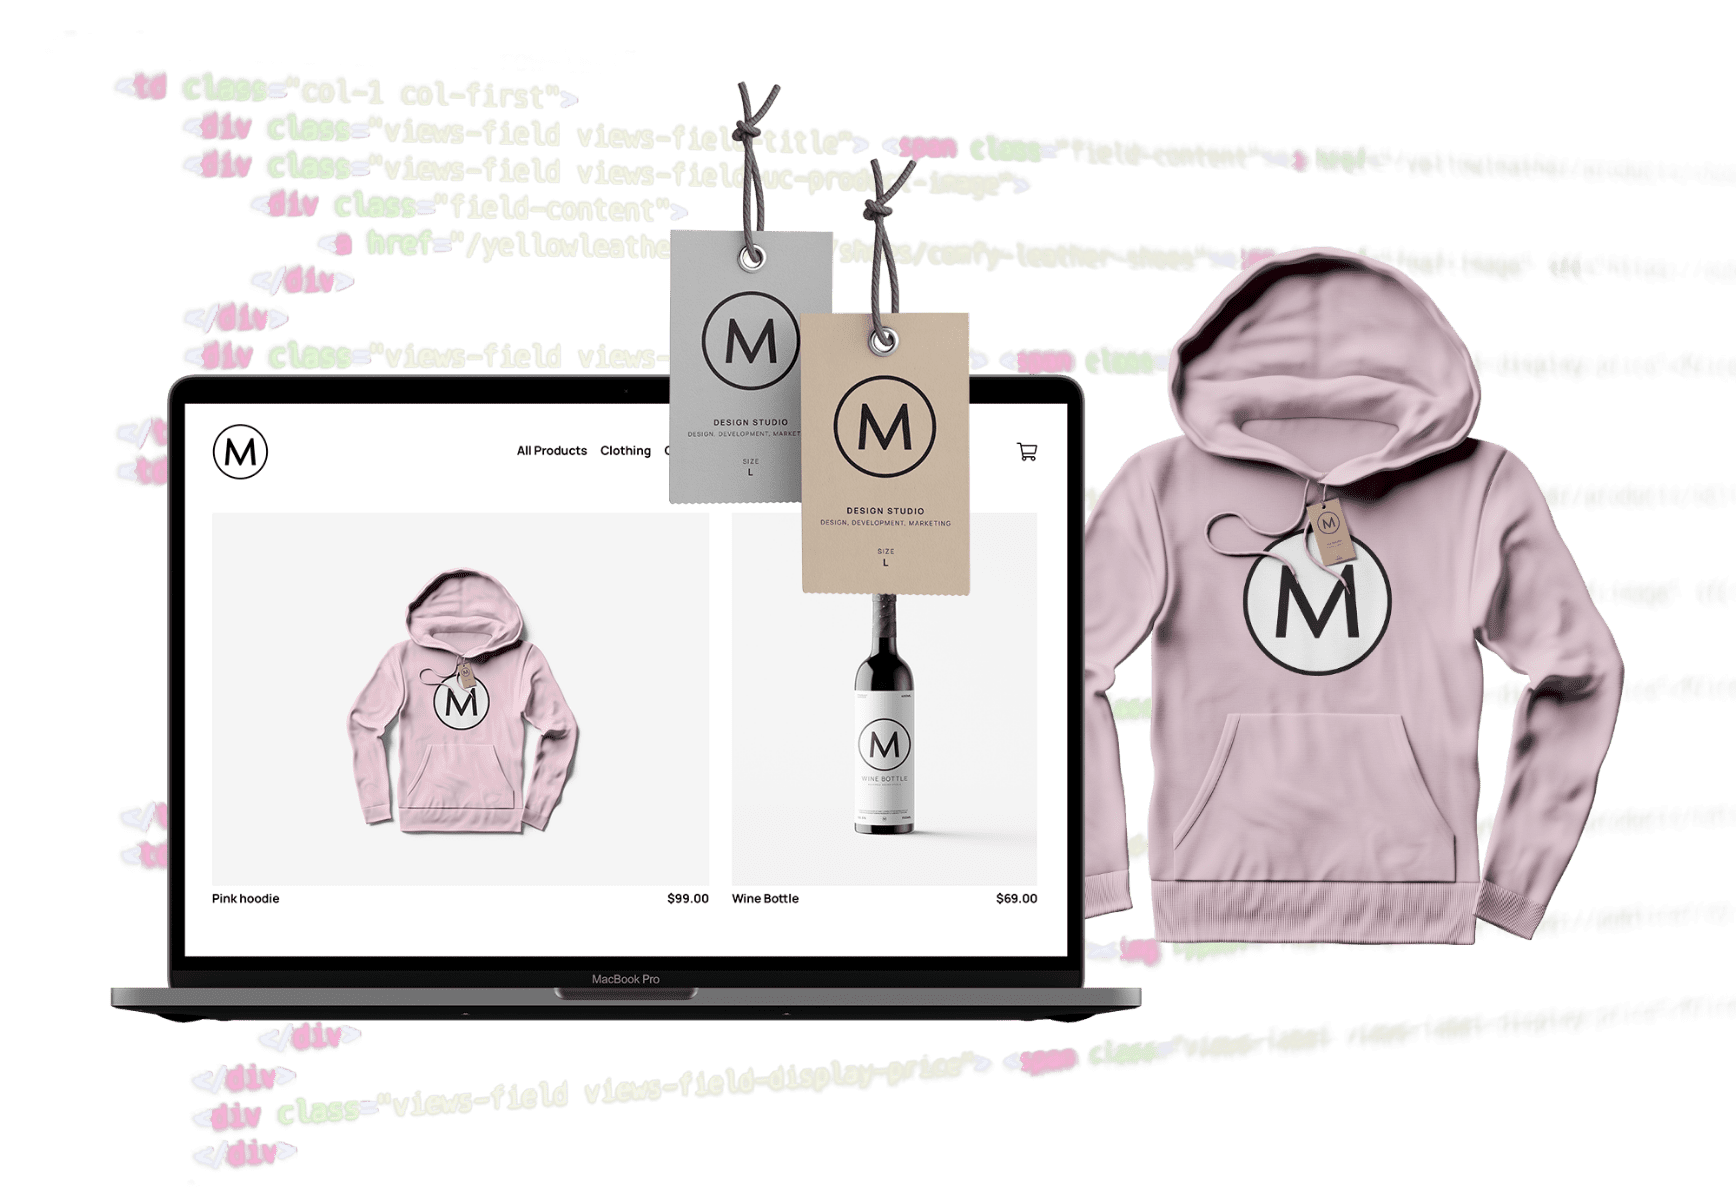 Graphic of computer code in the background with a laptop showing an ecommerce website in the foreground along with branded clothing tags and a pink hoodie.